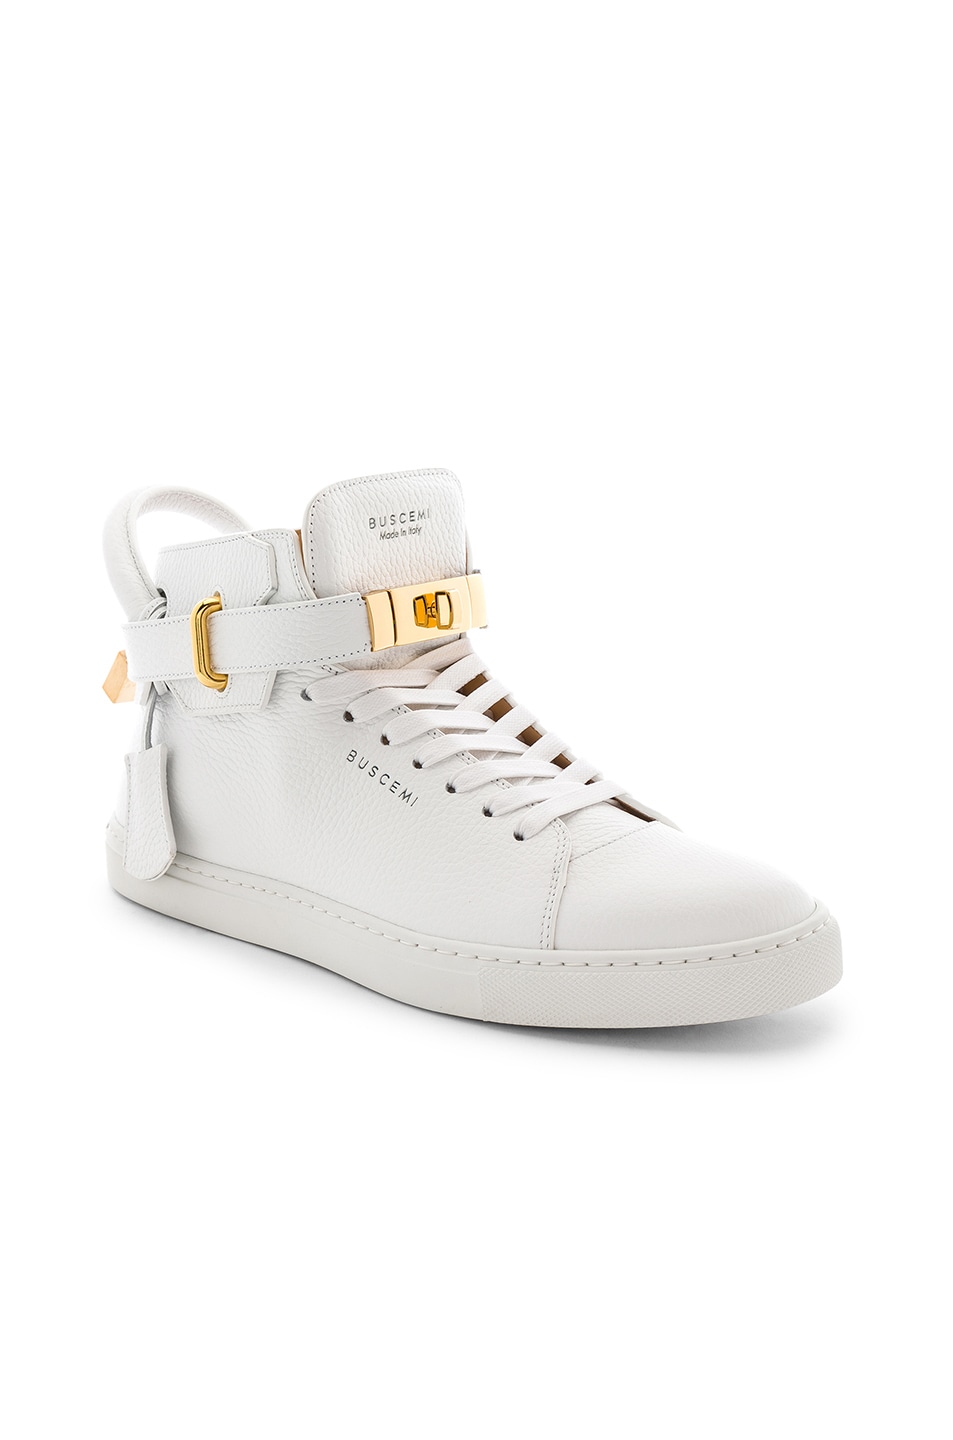 Image 1 of Buscemi 100MM High Top Pebbled Leather Sneakers in White